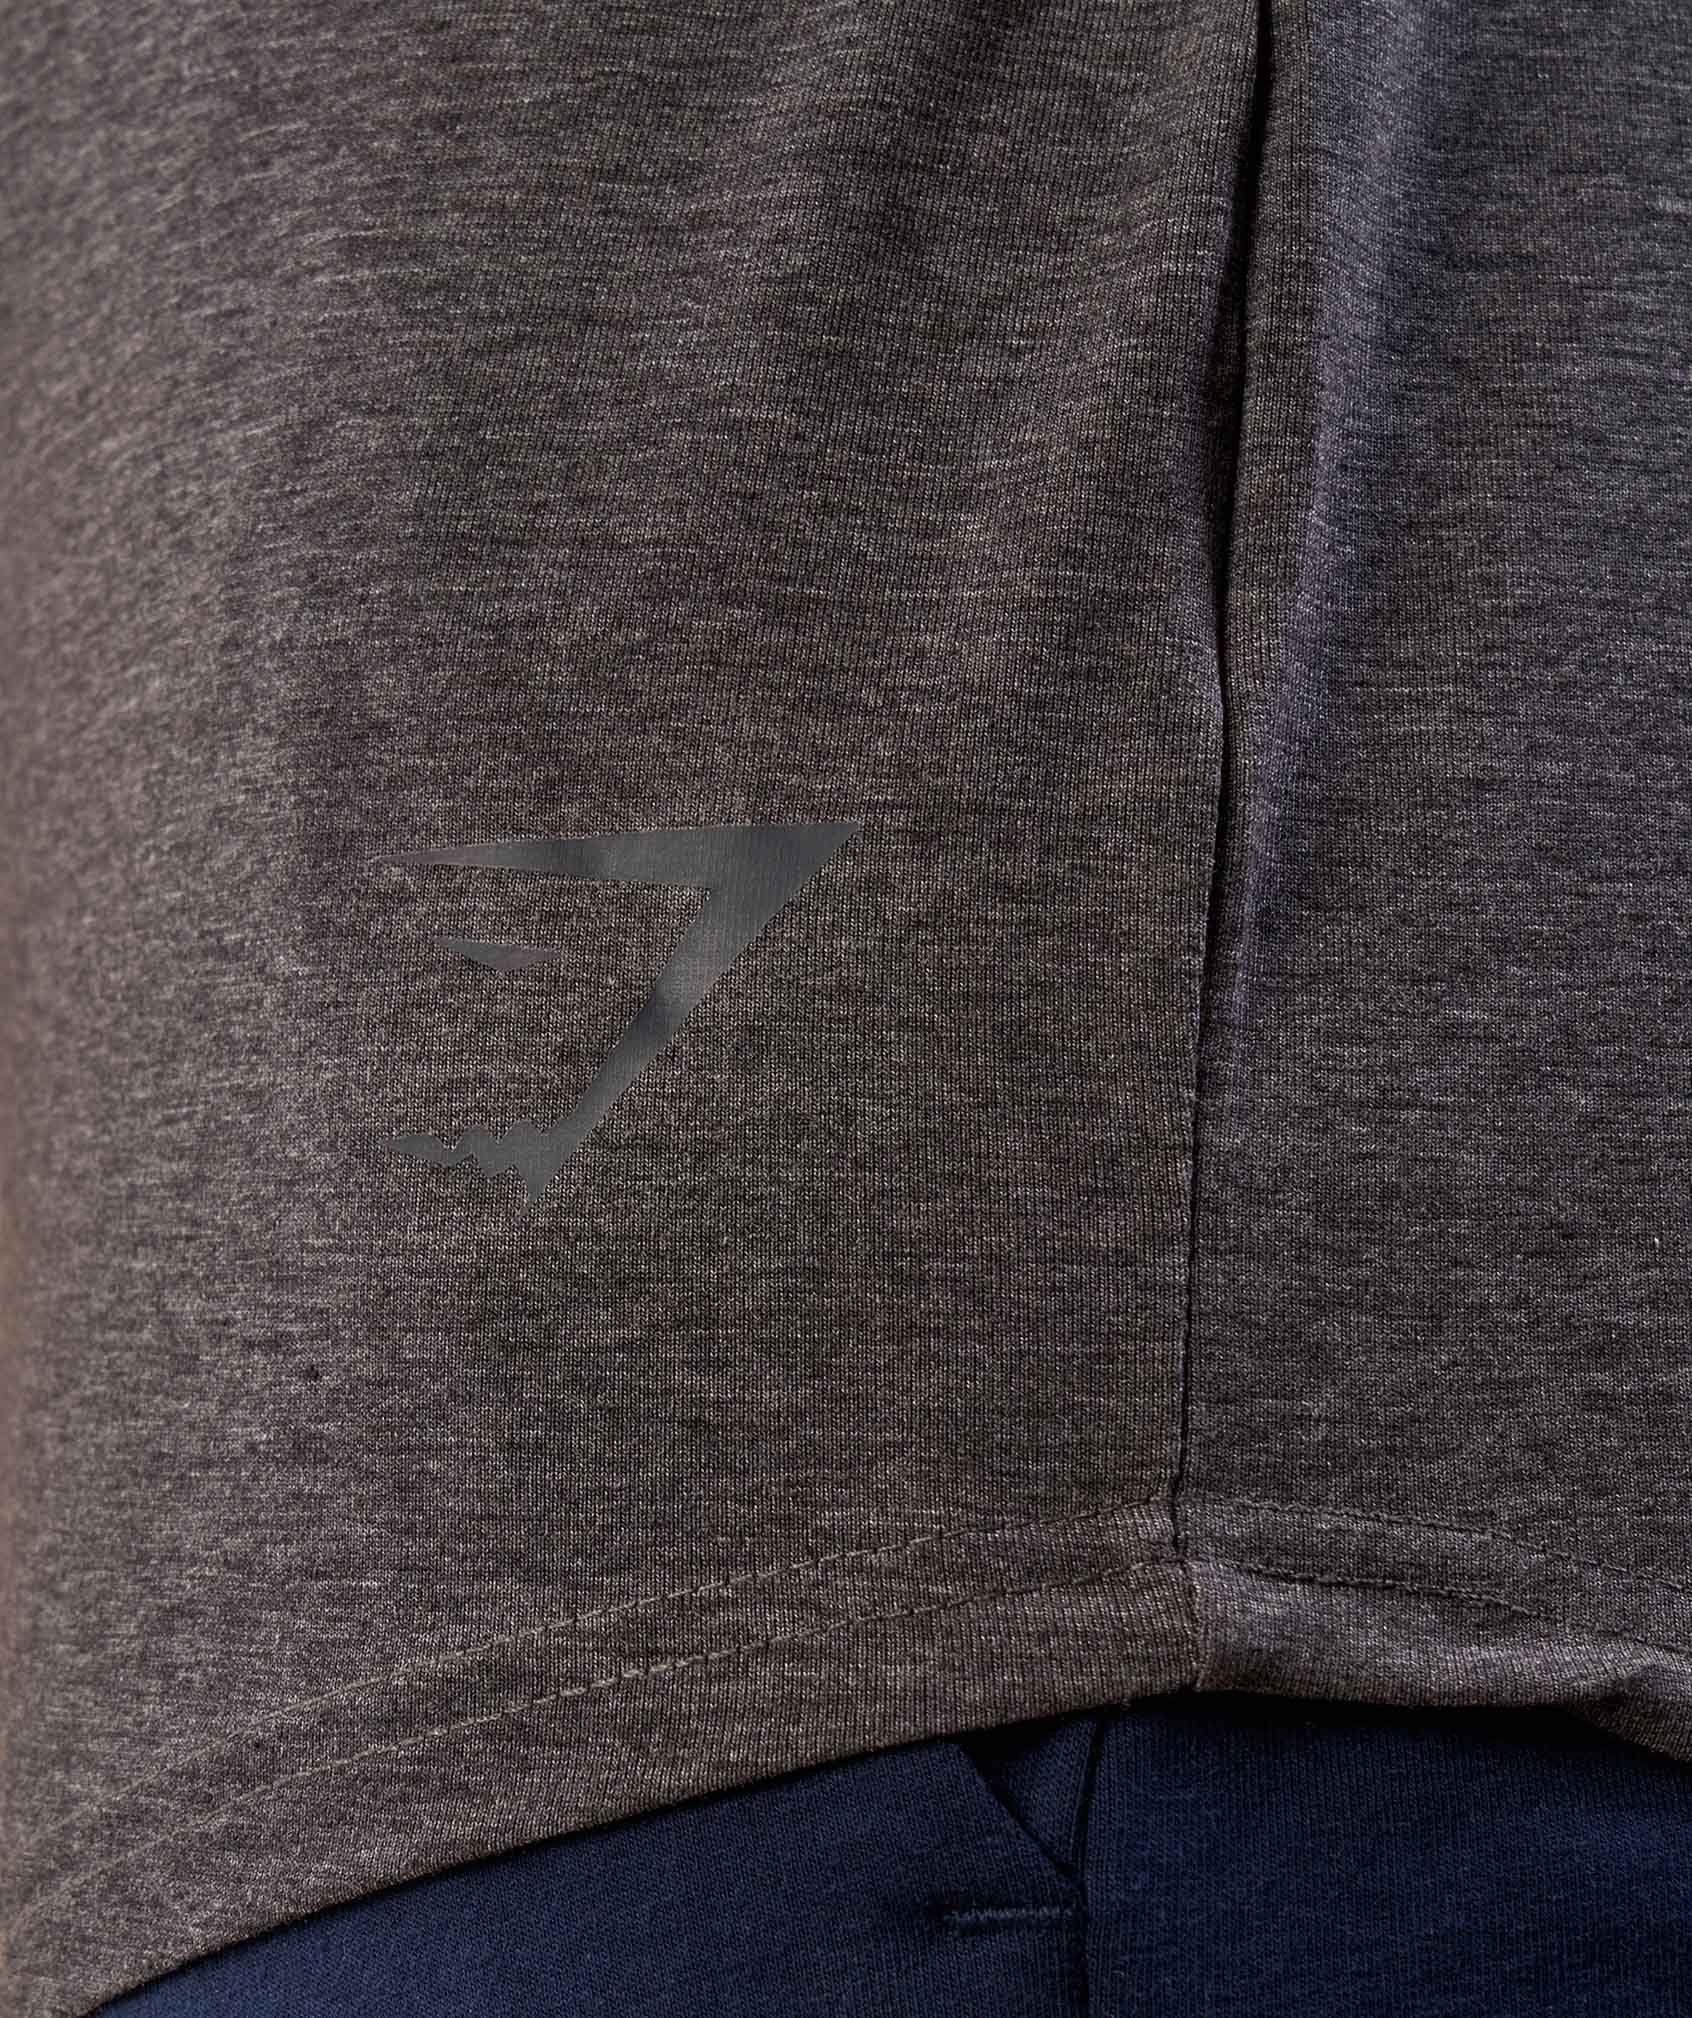 Solace Longline T-Shirt in Charcoal Marl - view 6